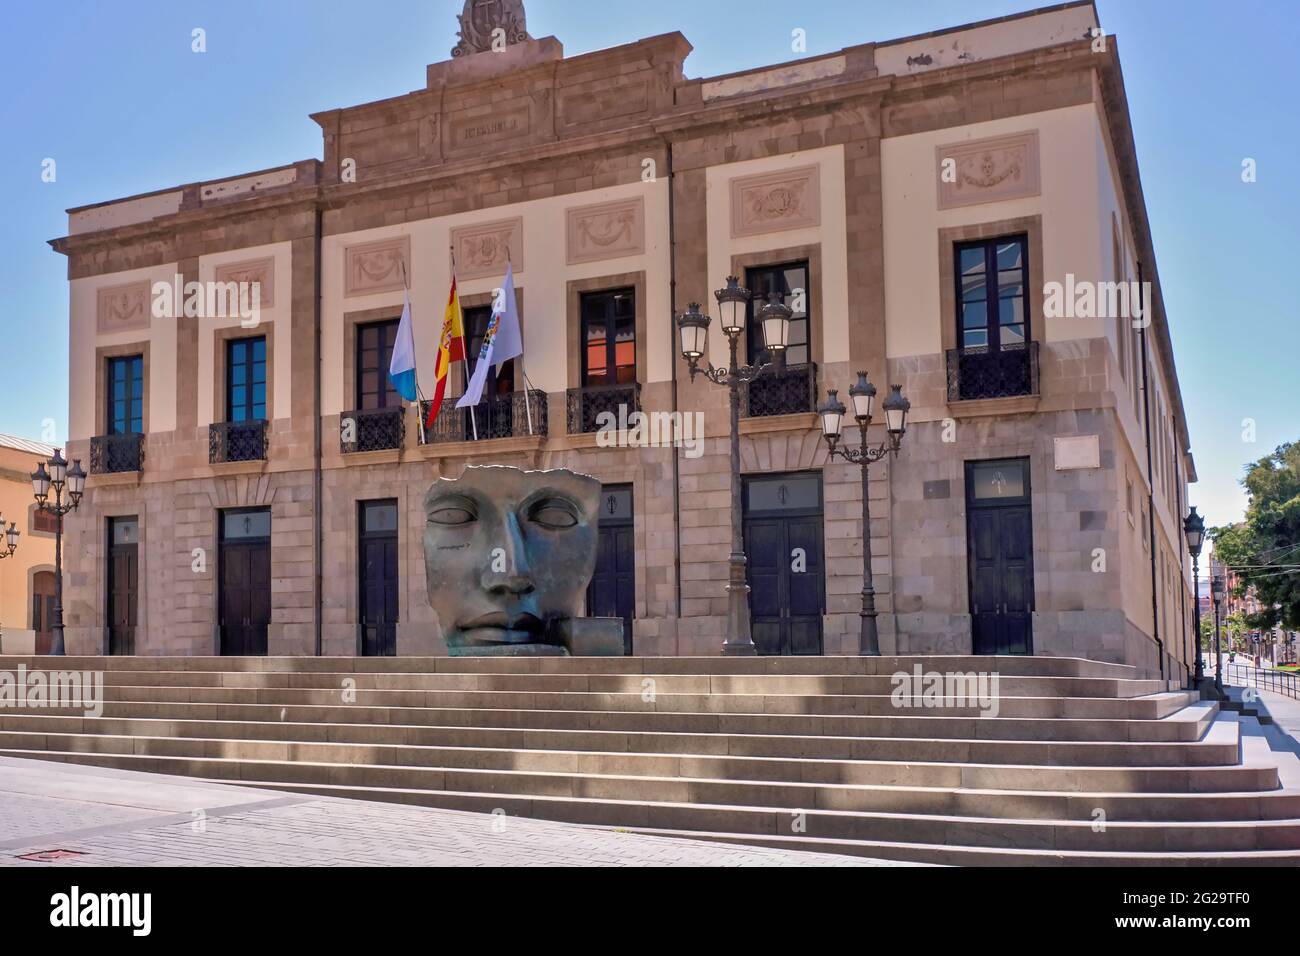 The Guimera Theater in Santa Cruz de Tenerife, Canary Island. It was built in 1849 and is the oldest theater in the Canary Islands. Stock Photo